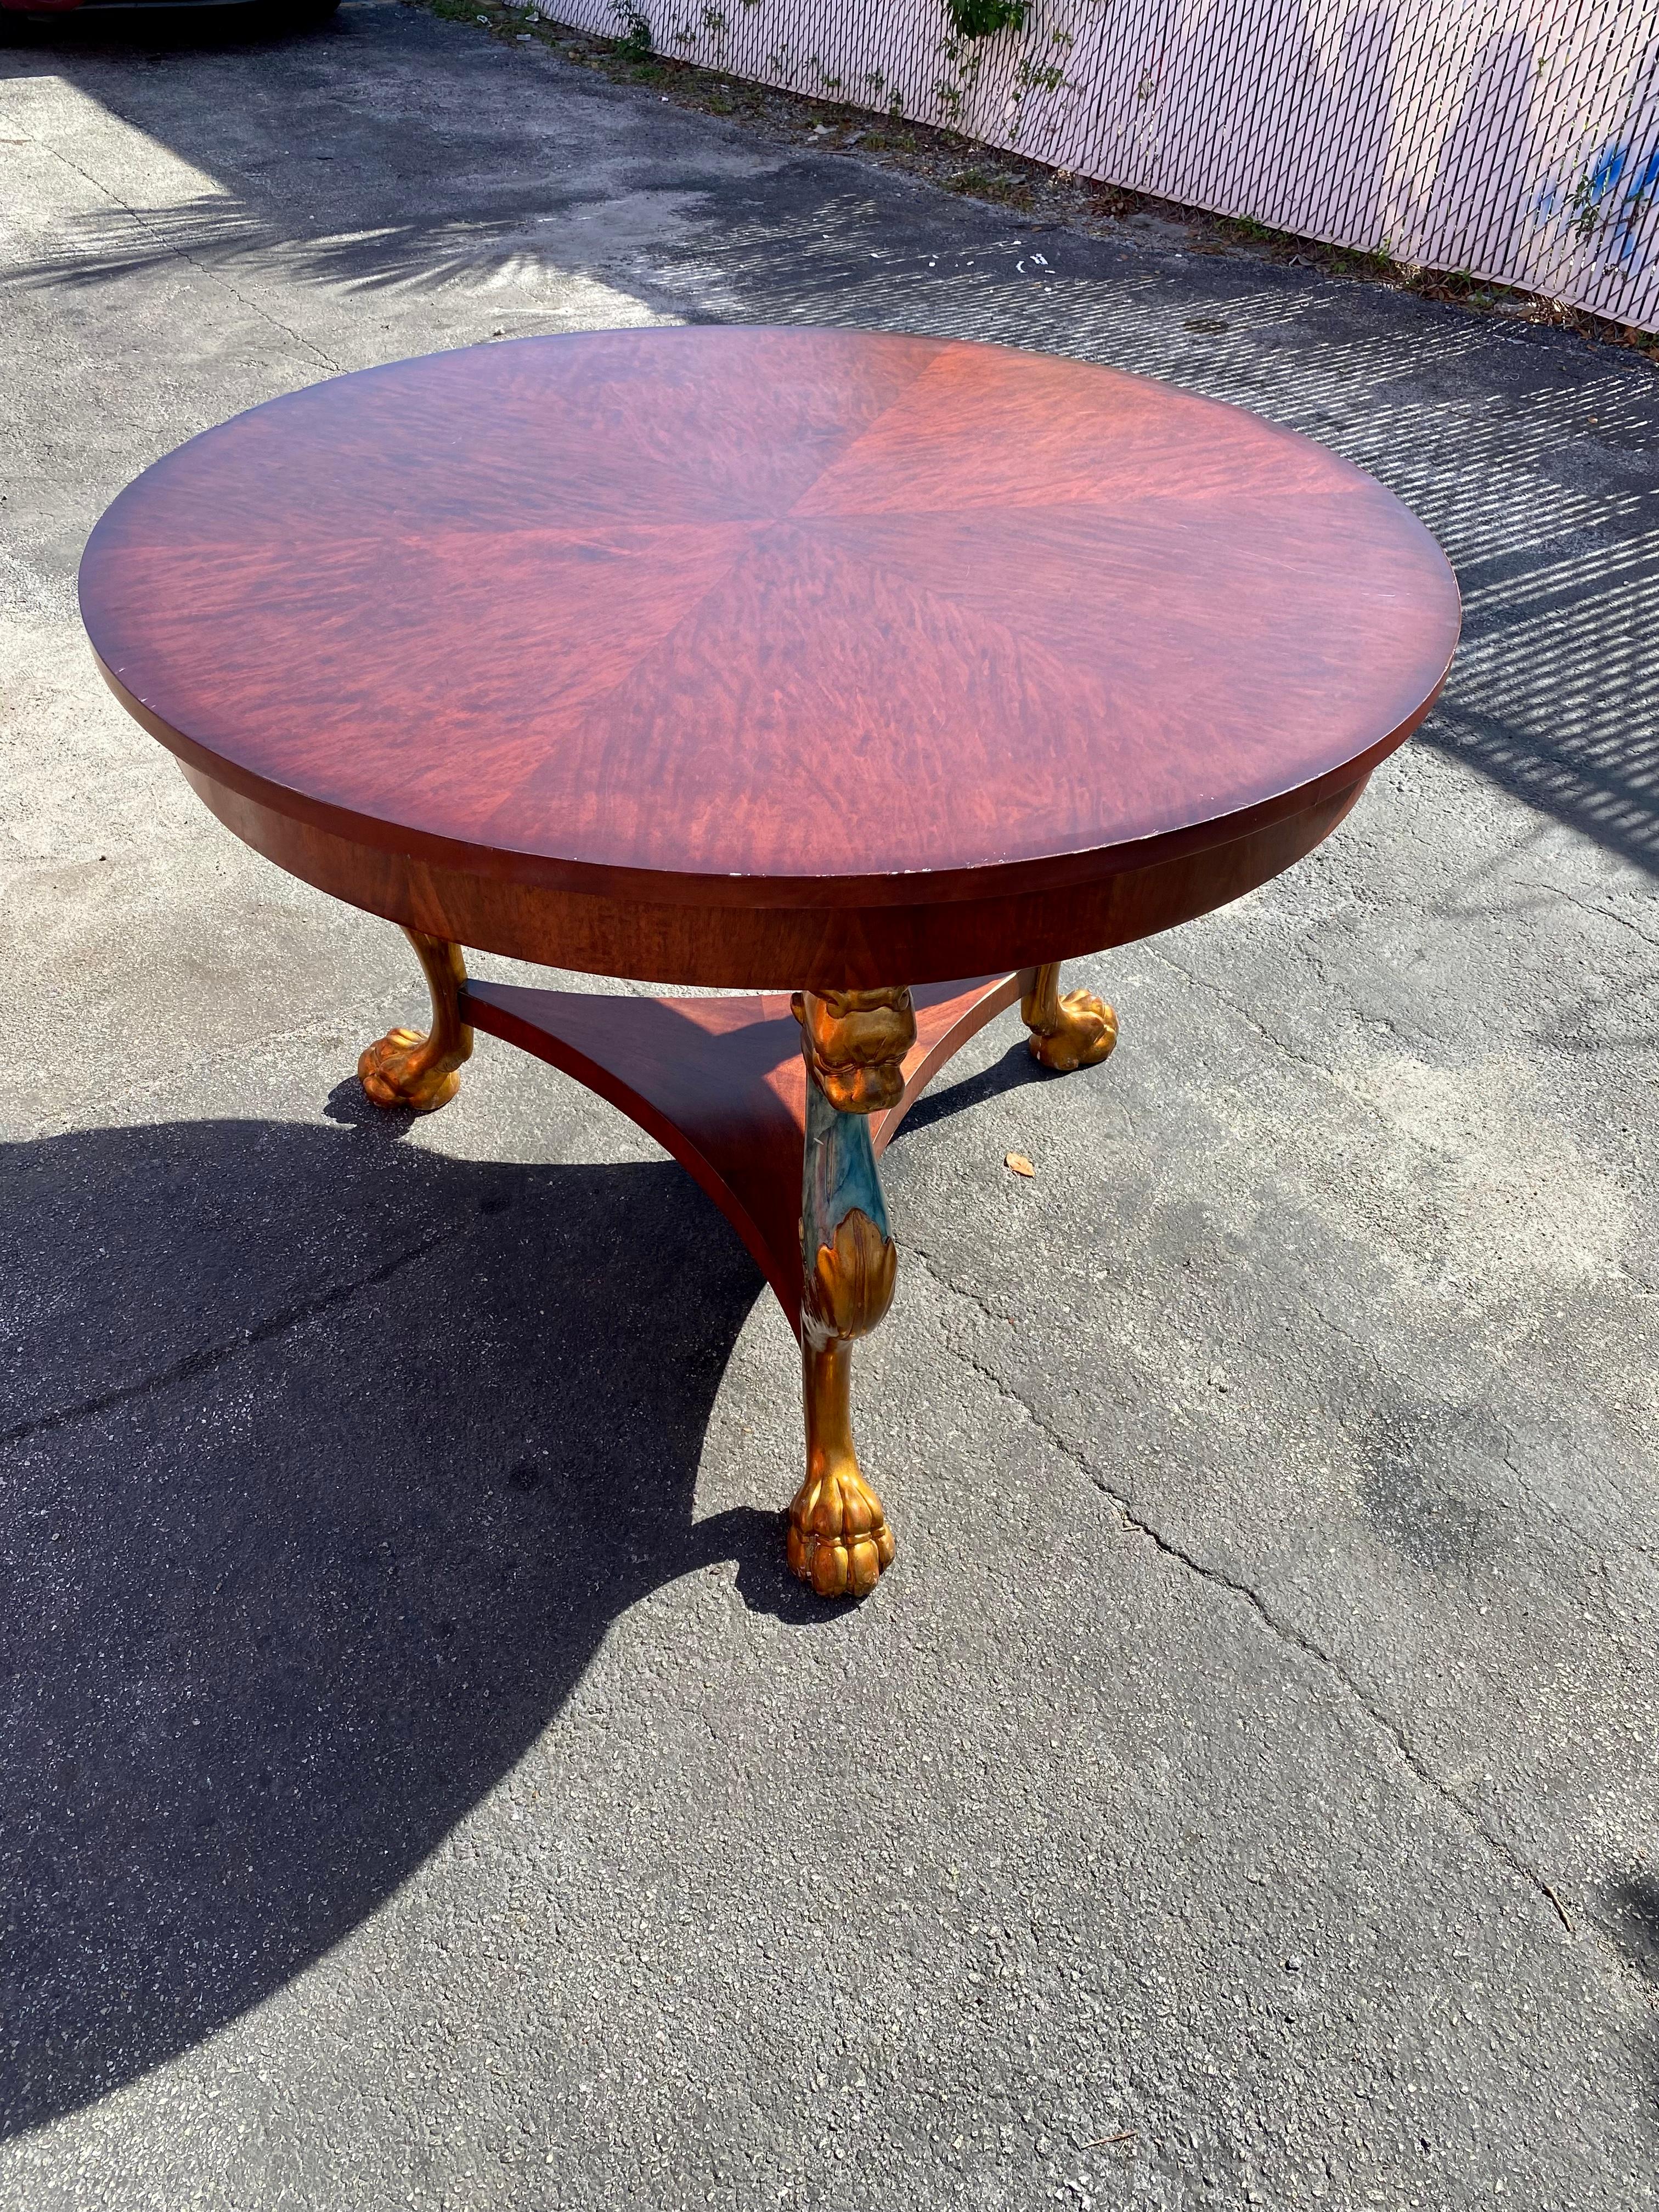 Empire Revival 1980s Italian Round Tripod Empire Style Lion Carved Wood Center Dining Table For Sale